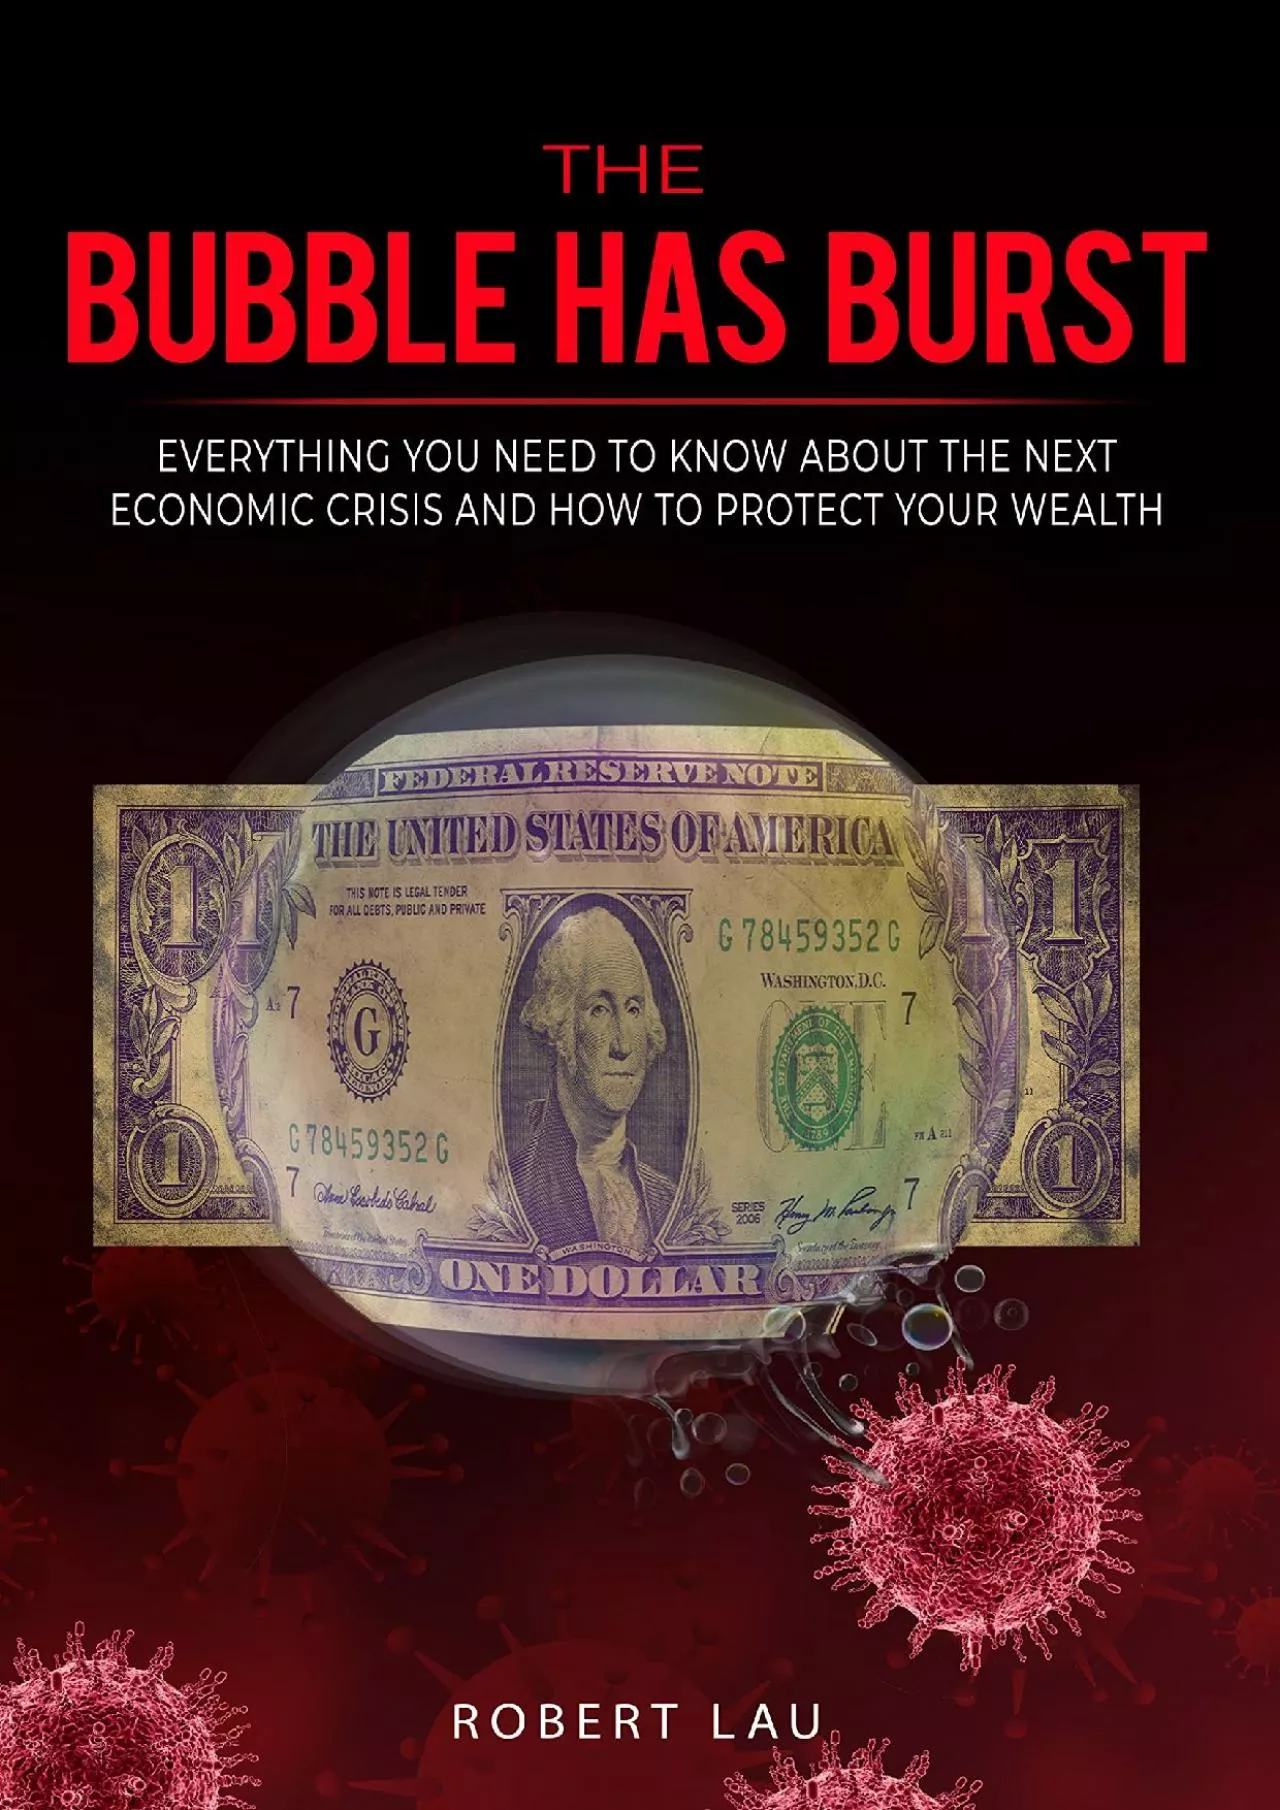 The Bubble Has Burst: Everything You Need to Know About the Next Economic Crisis and How